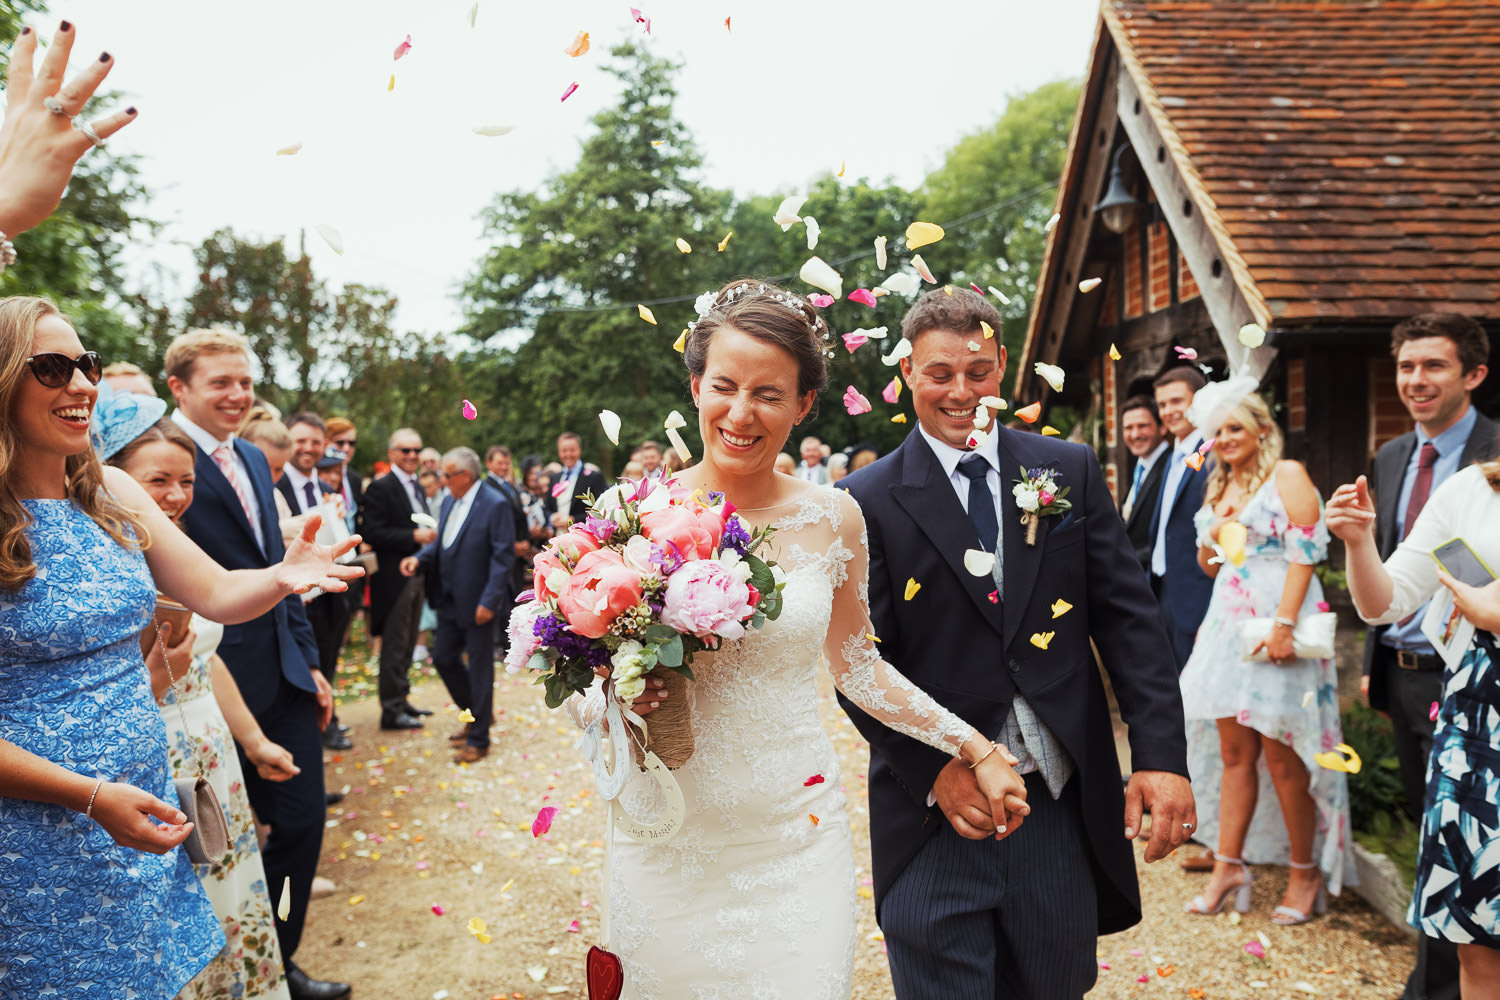 Outside St Peter's Church in Great Totham people through petals at a couple who just got married.